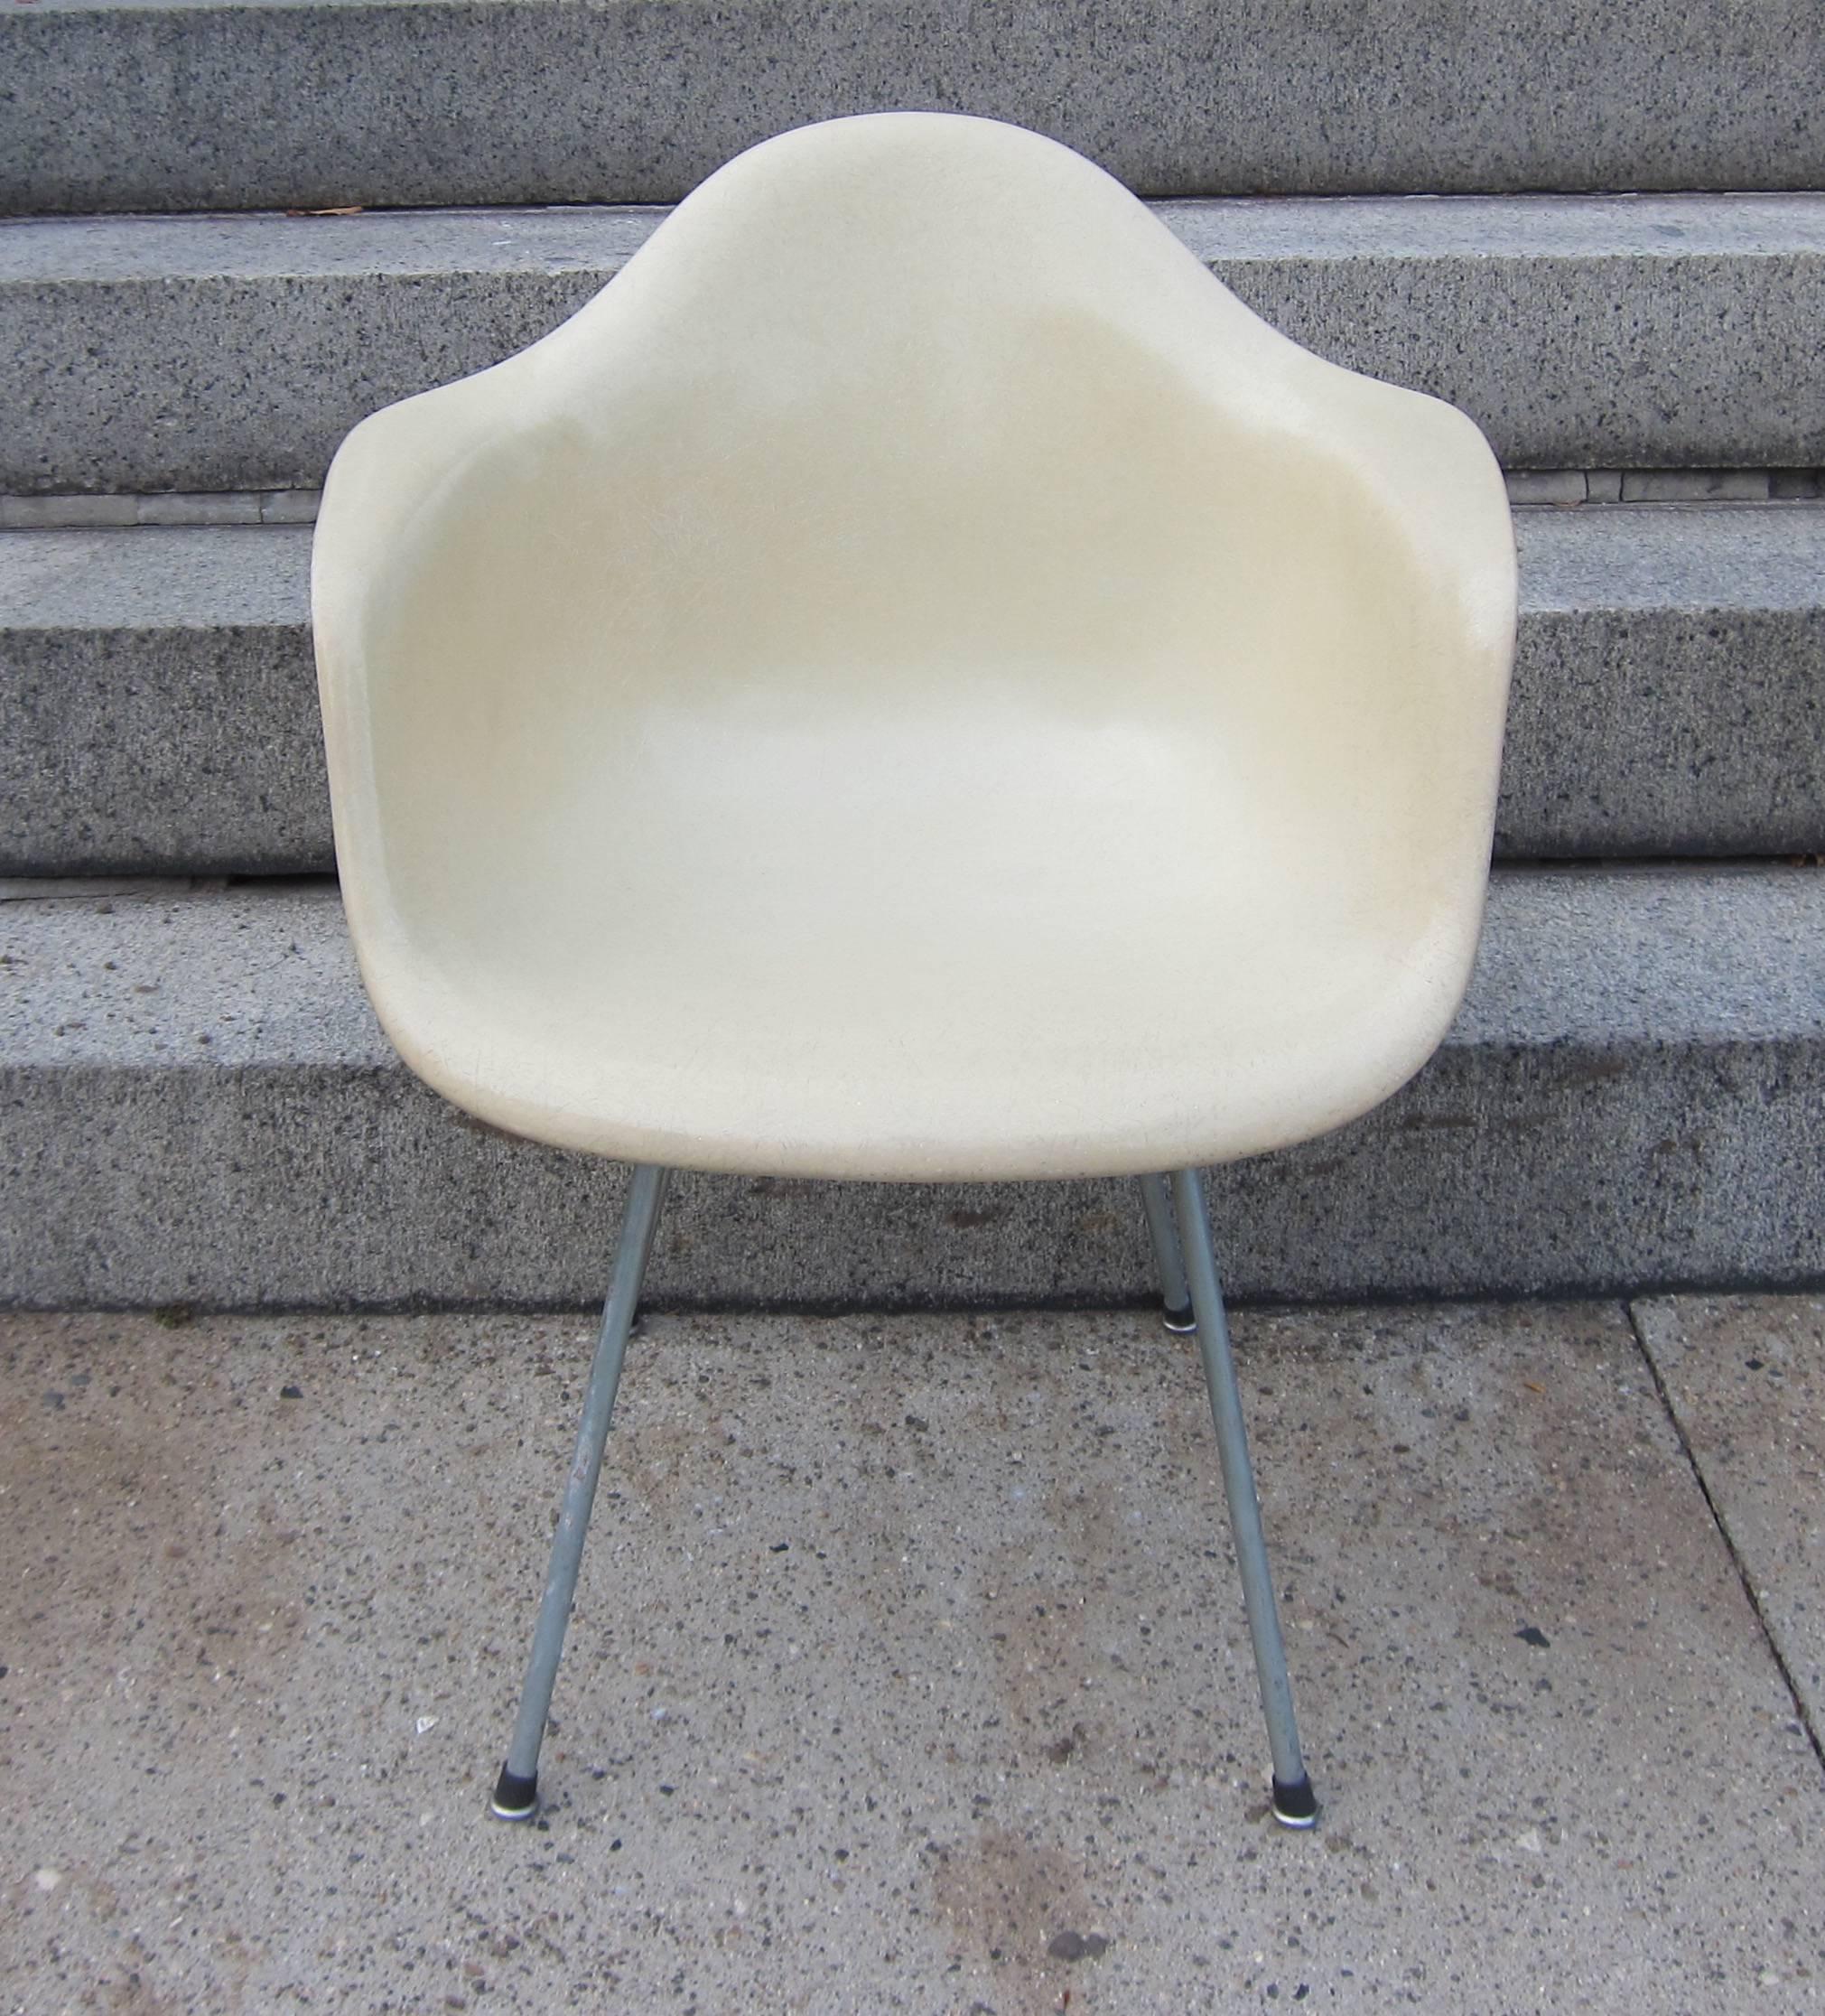 Herman Miller Eames DAX armchair in parchment. This is a second generation/transitional Zenith shell with large (original) shock mounts and an original “X” base with boot glides. In Excellent original condition with no stains, cracks, holes, or